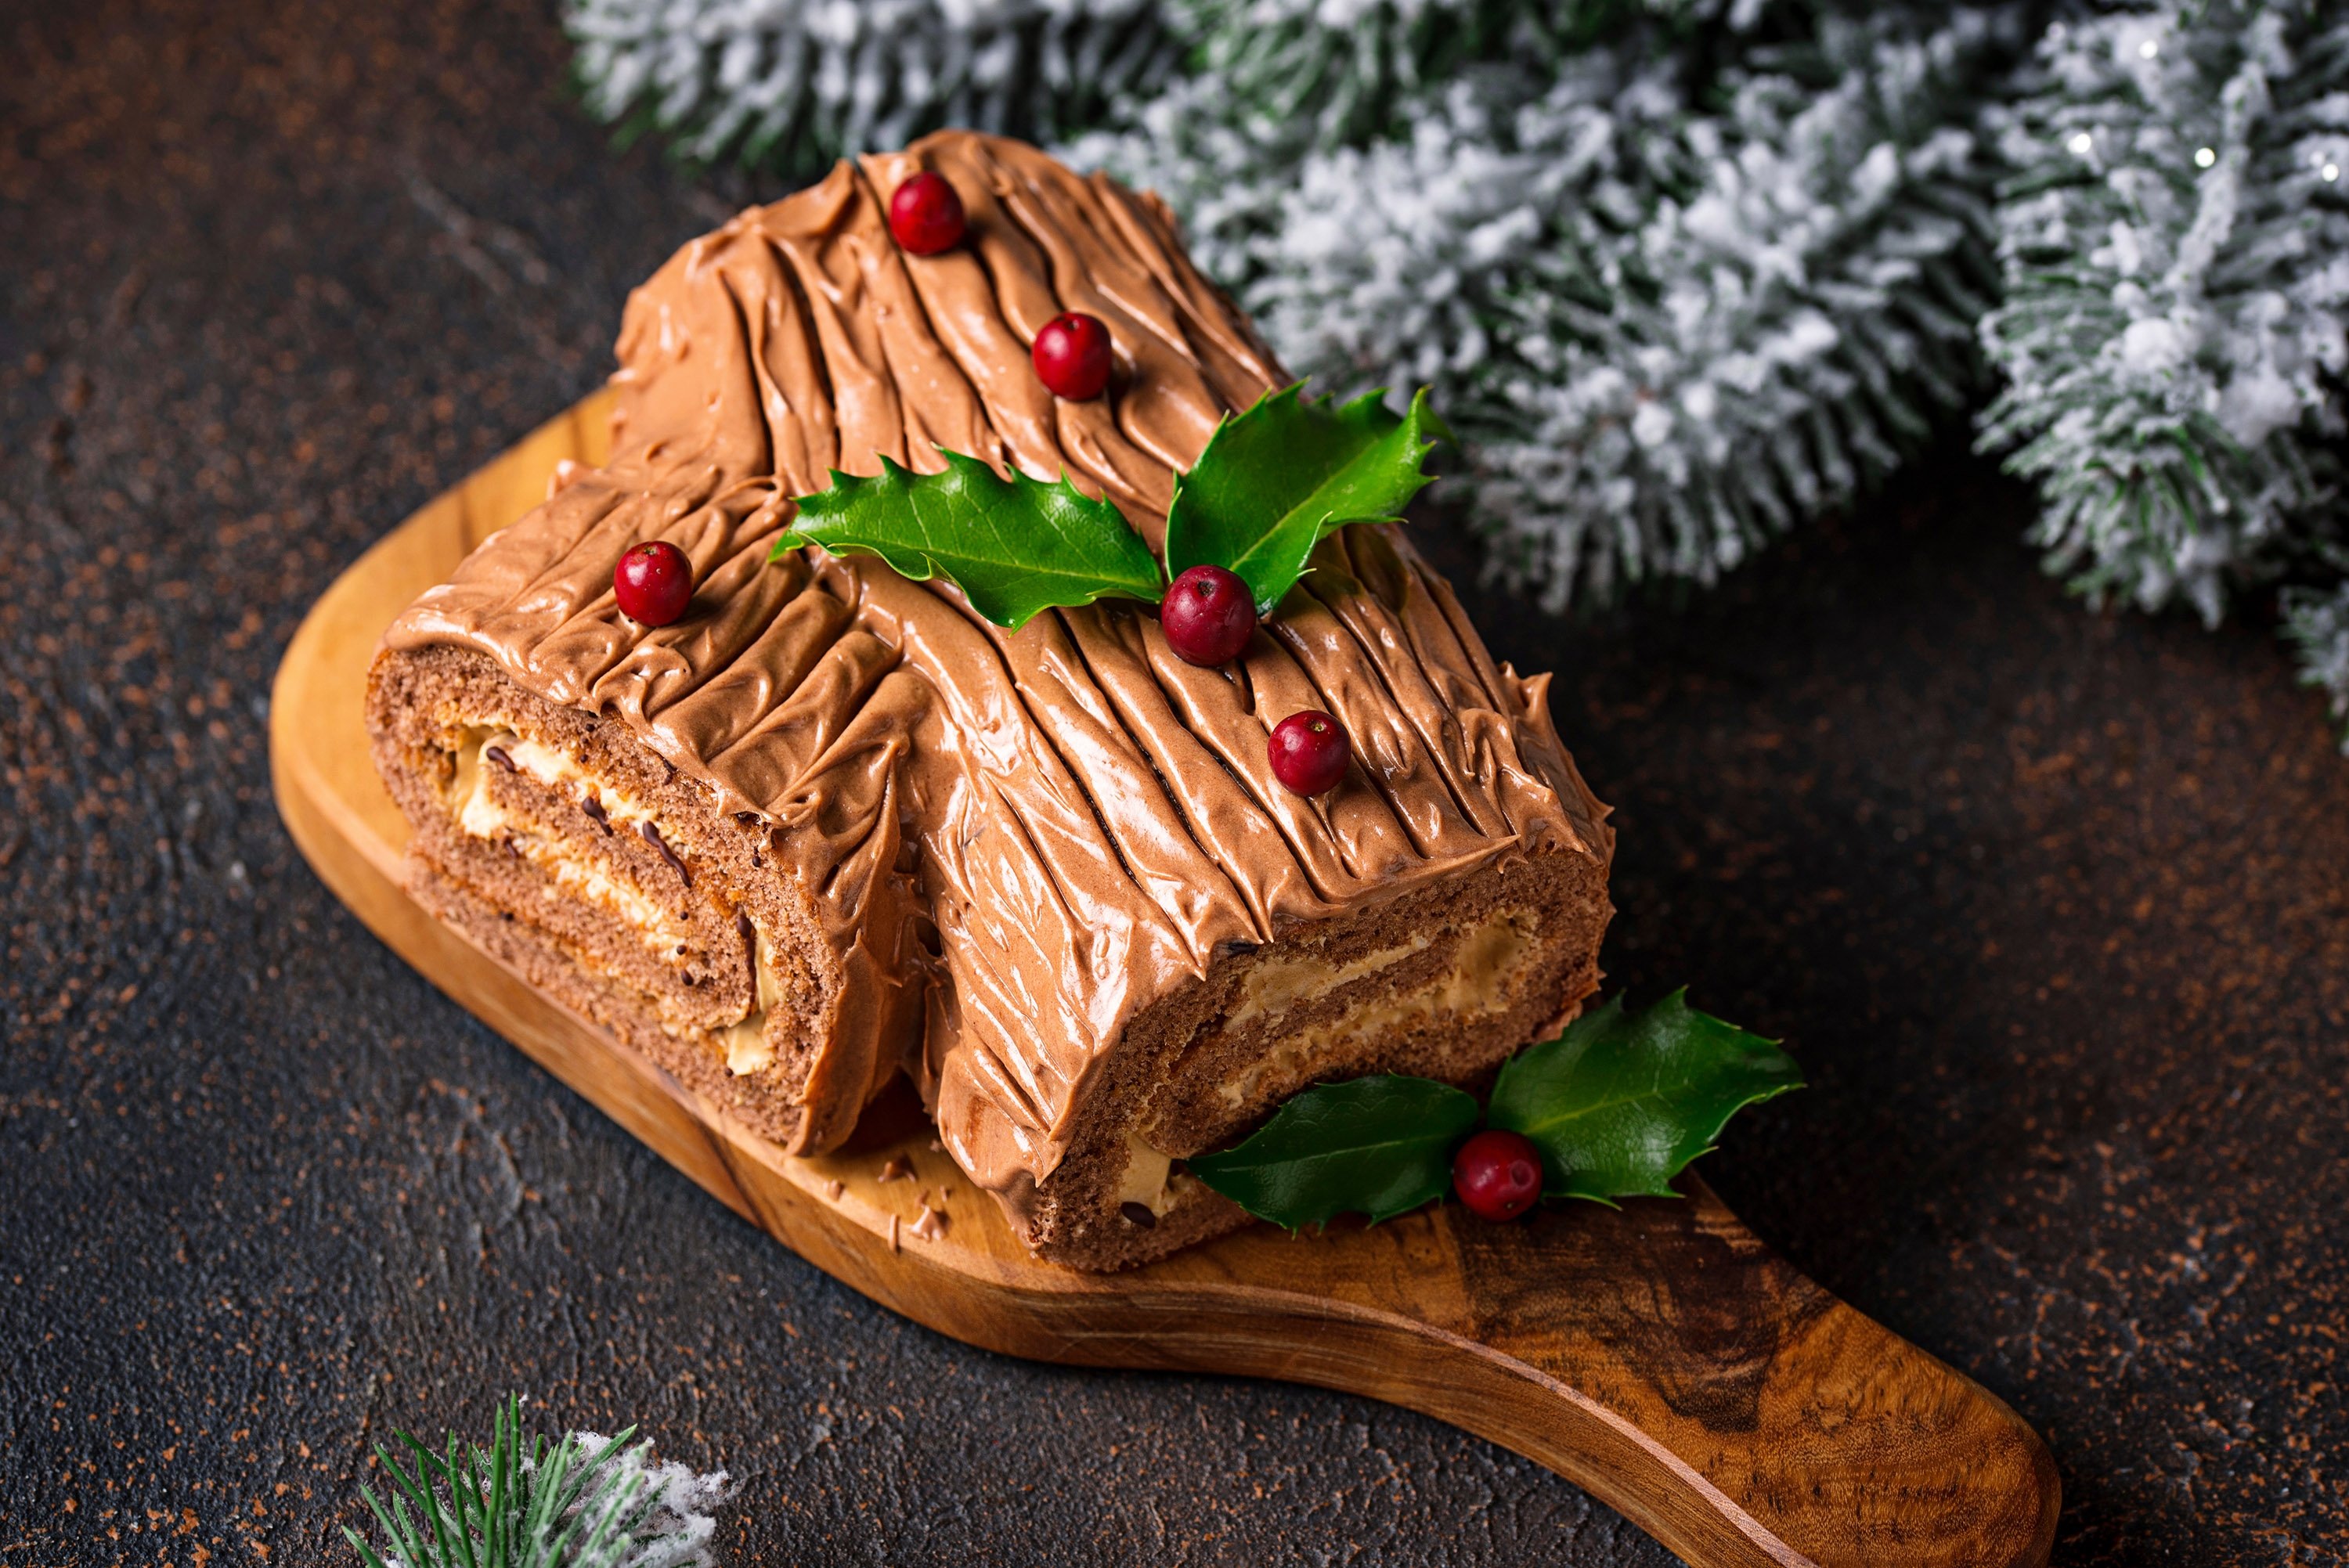 The Yule log, or Christmas block, is a desert tradition in Europe. (Shutterstock Photo)